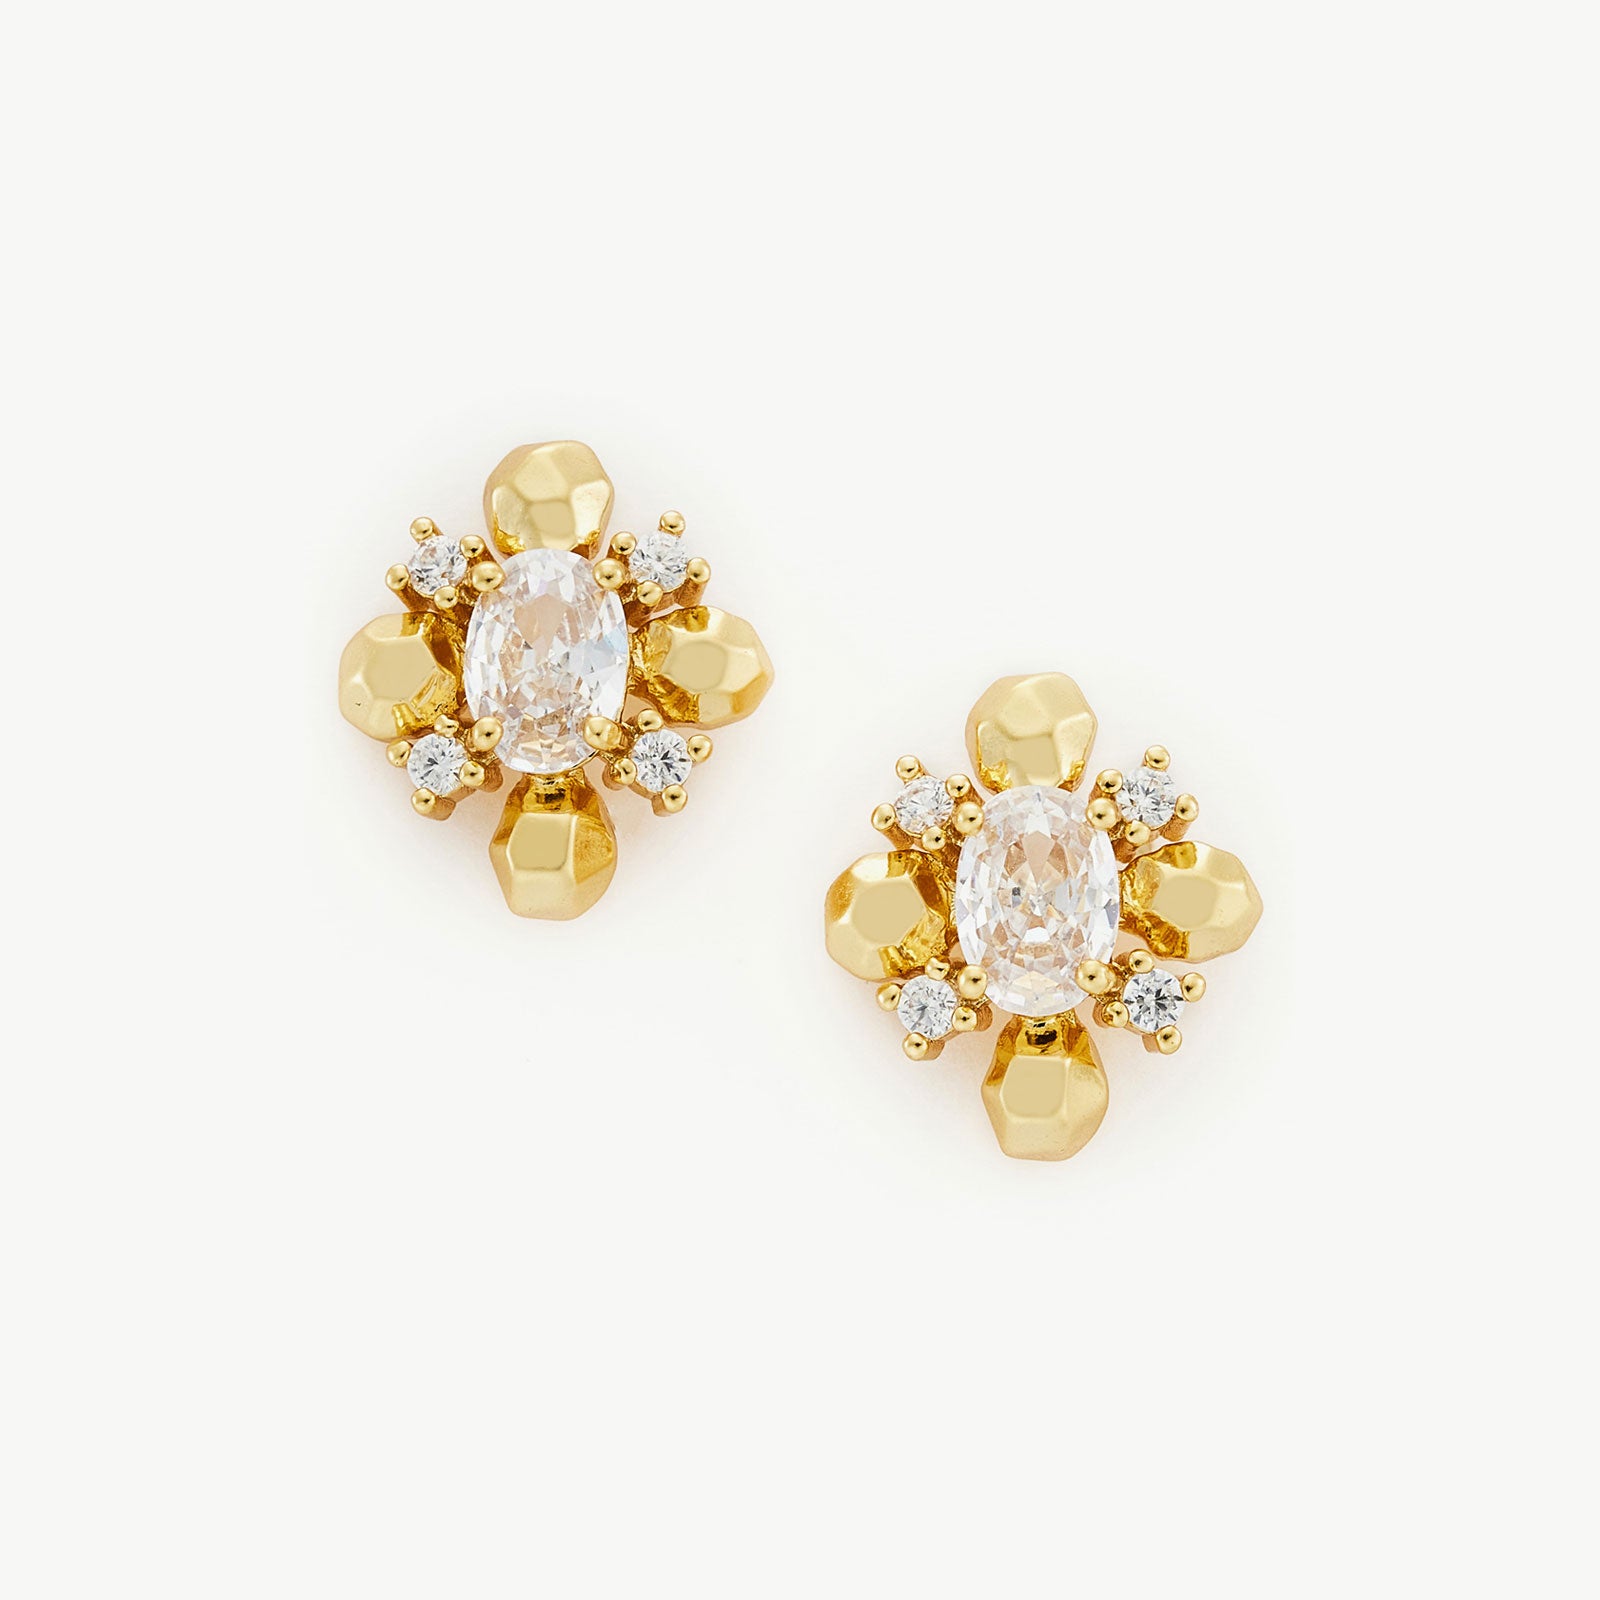 Crystal Stud Earrings, a pair of elegant and sparkling earrings that add a touch of glamour to your ensemble